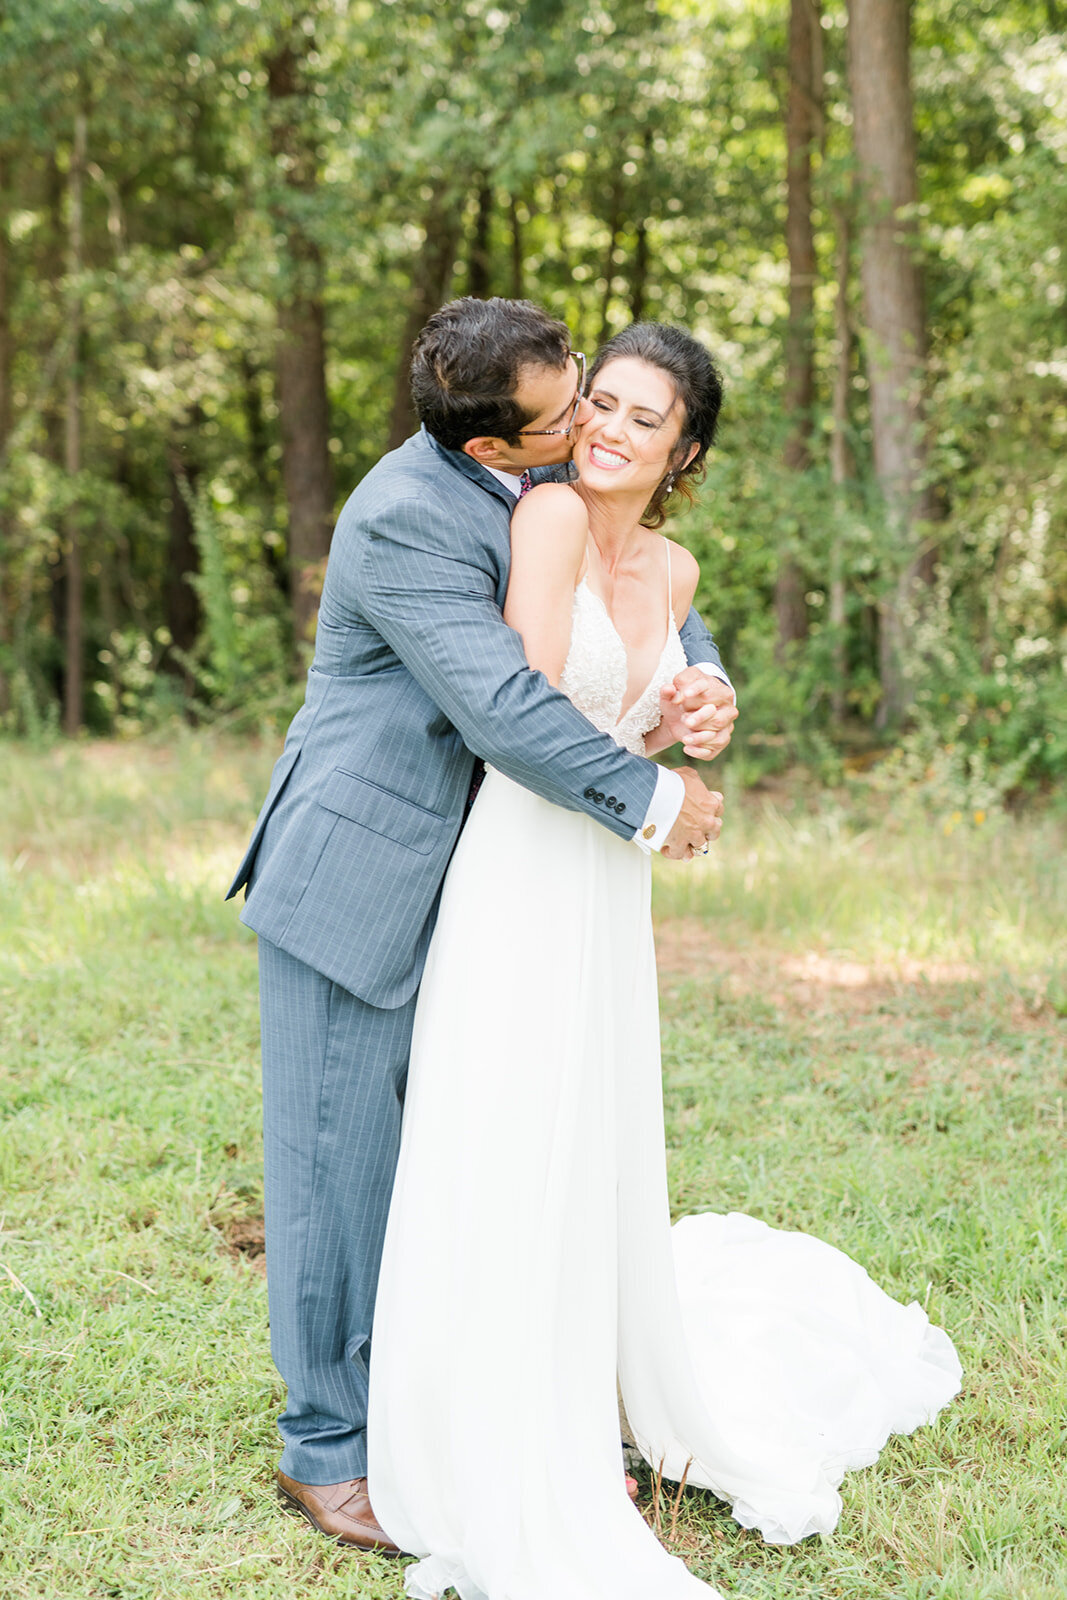 Full Service Wedding lanning and Design  - Wilmington NC